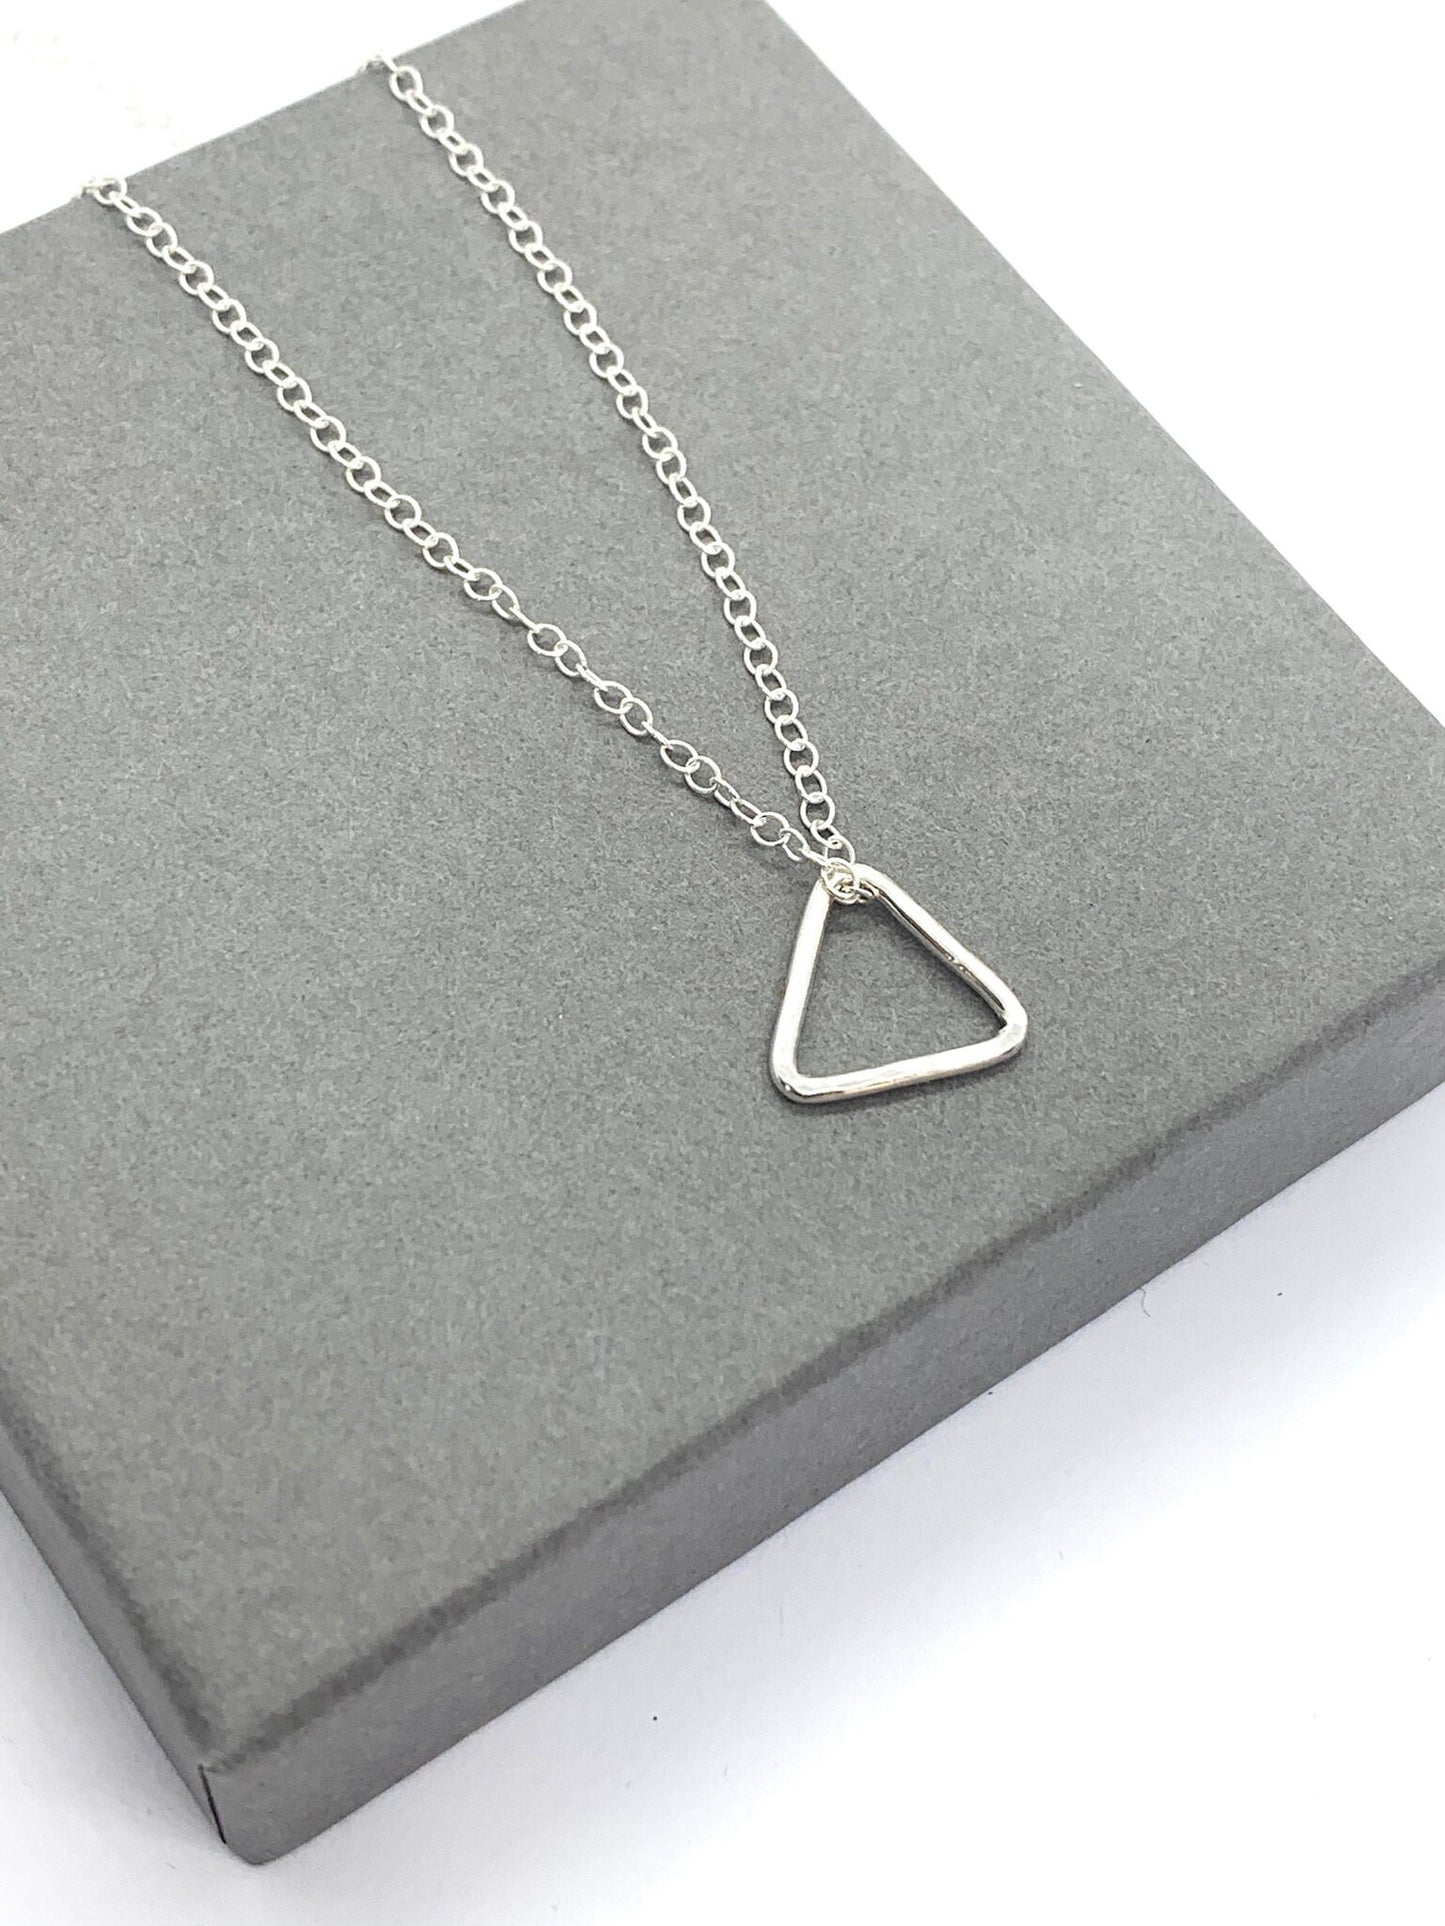 Sterling silver triangle necklace